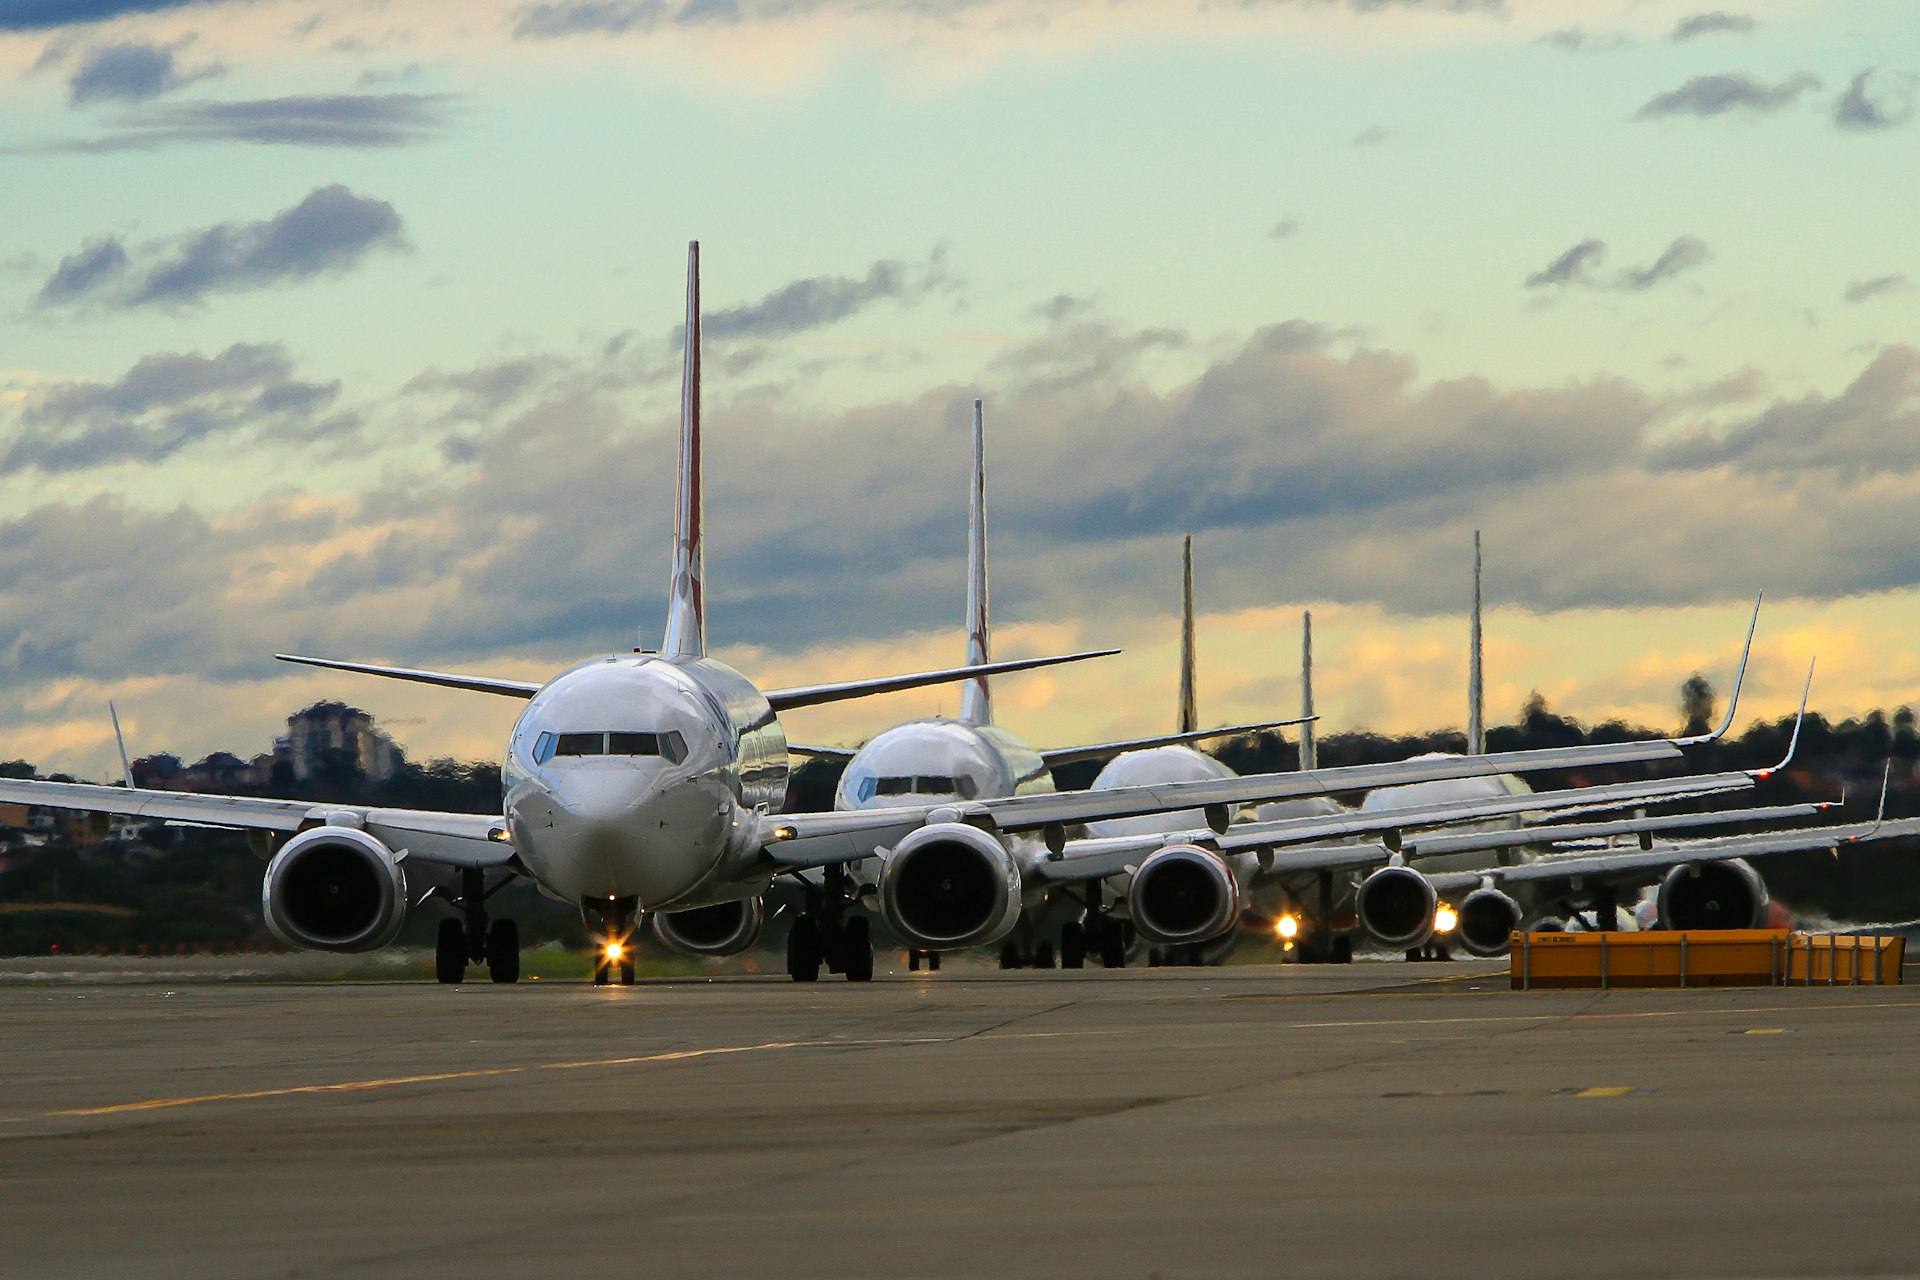 Jet airplanes lined up at dusk on runway